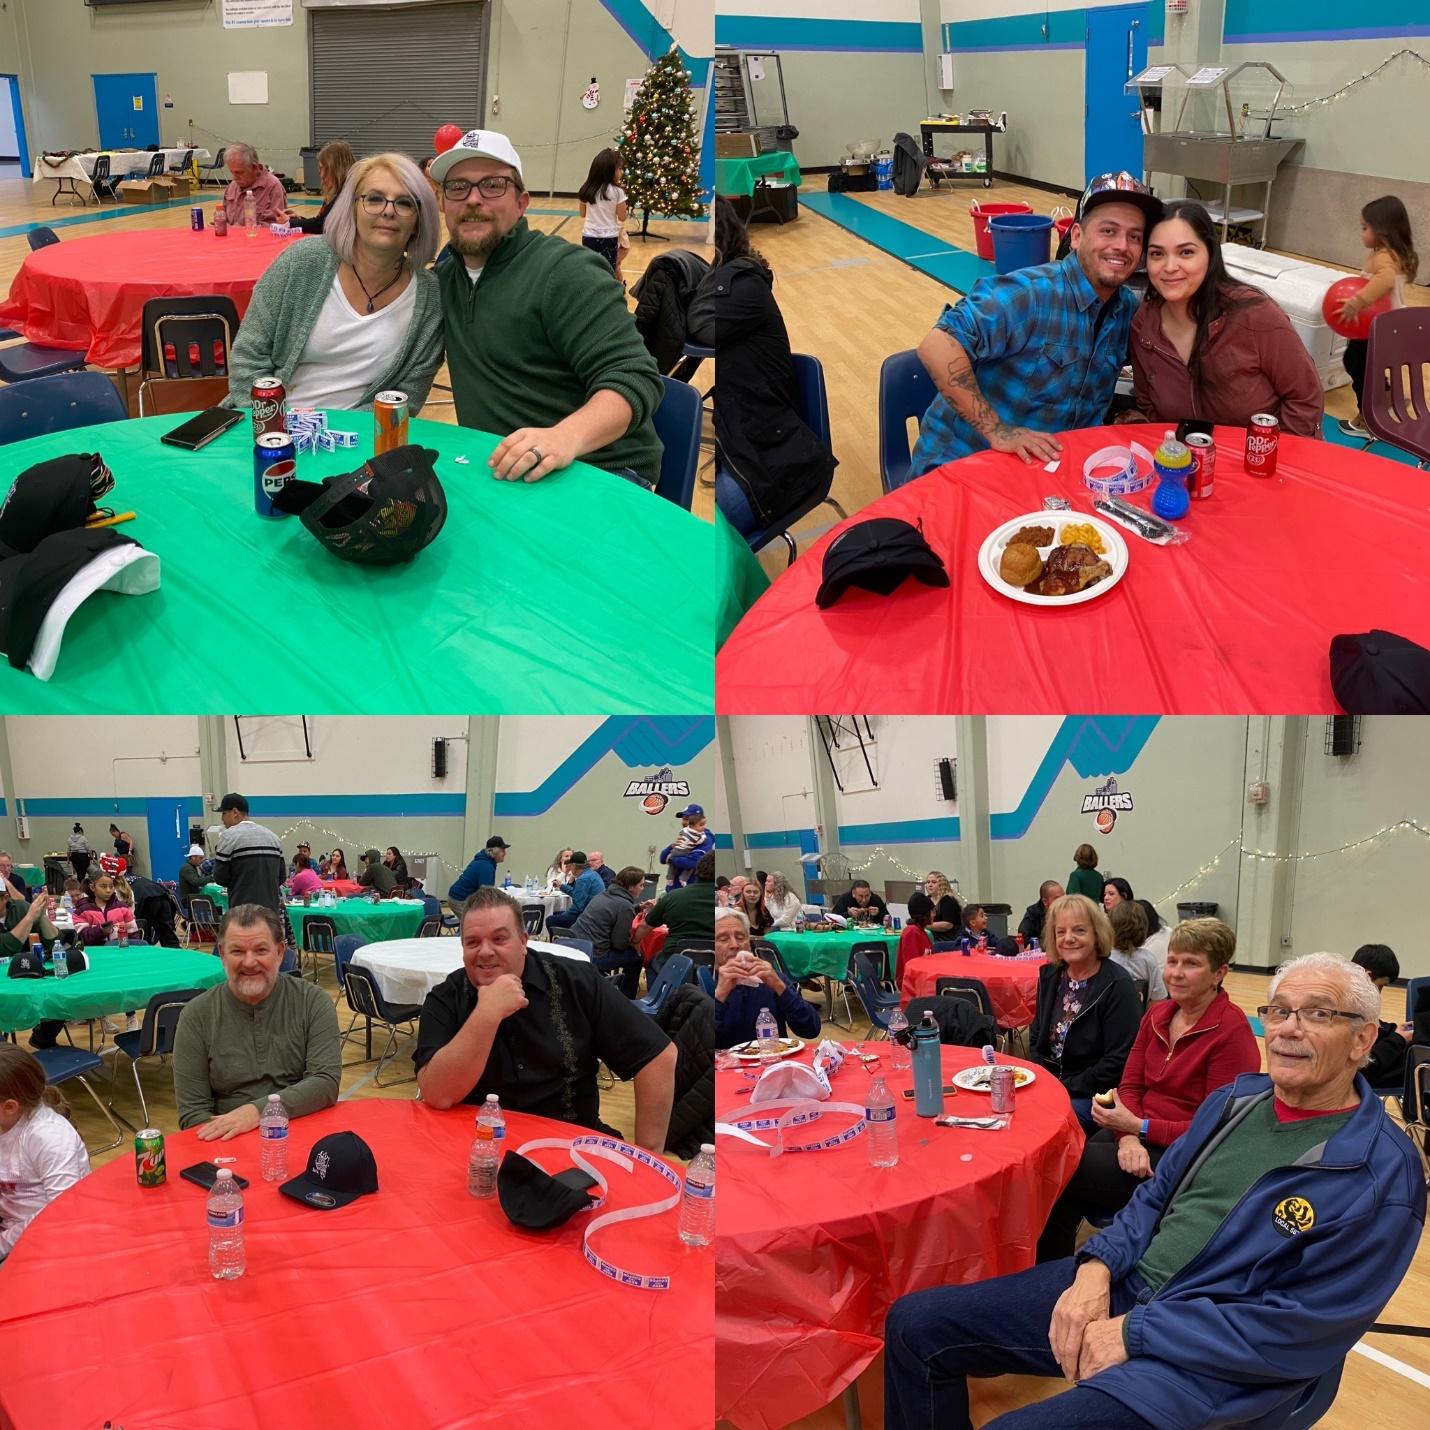 A collage of people sitting at tables

Description automatically generated